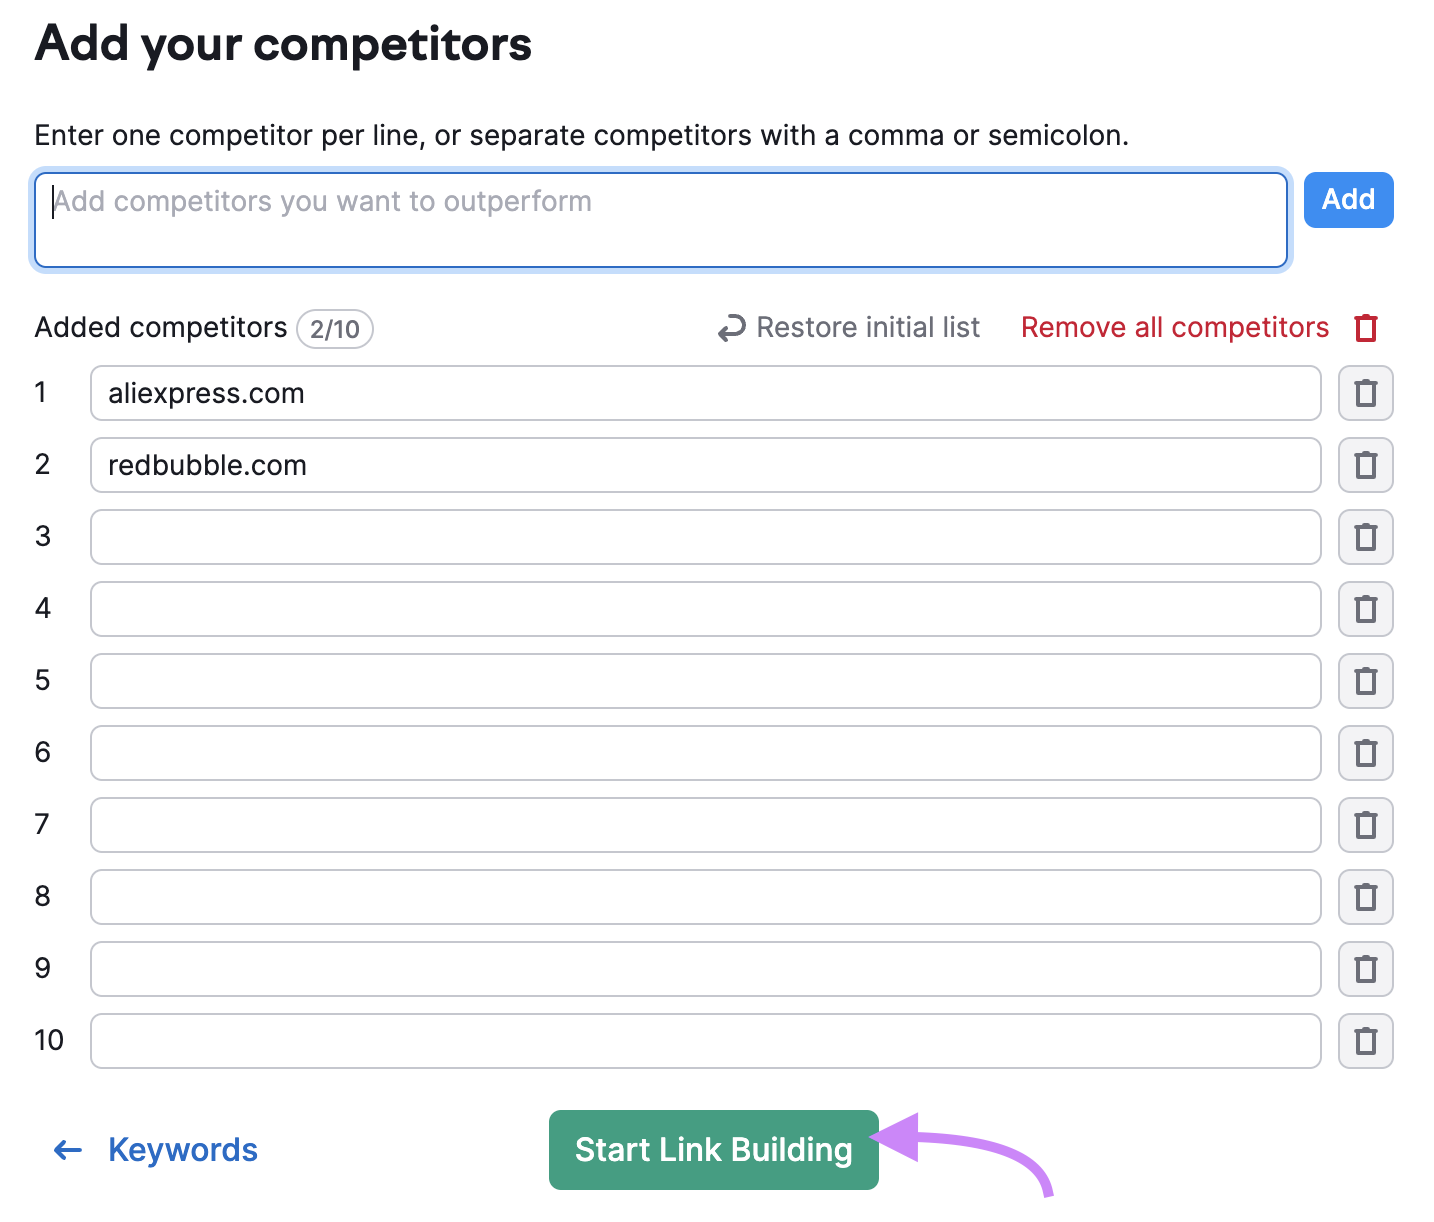 "Add your competitors" configuration page